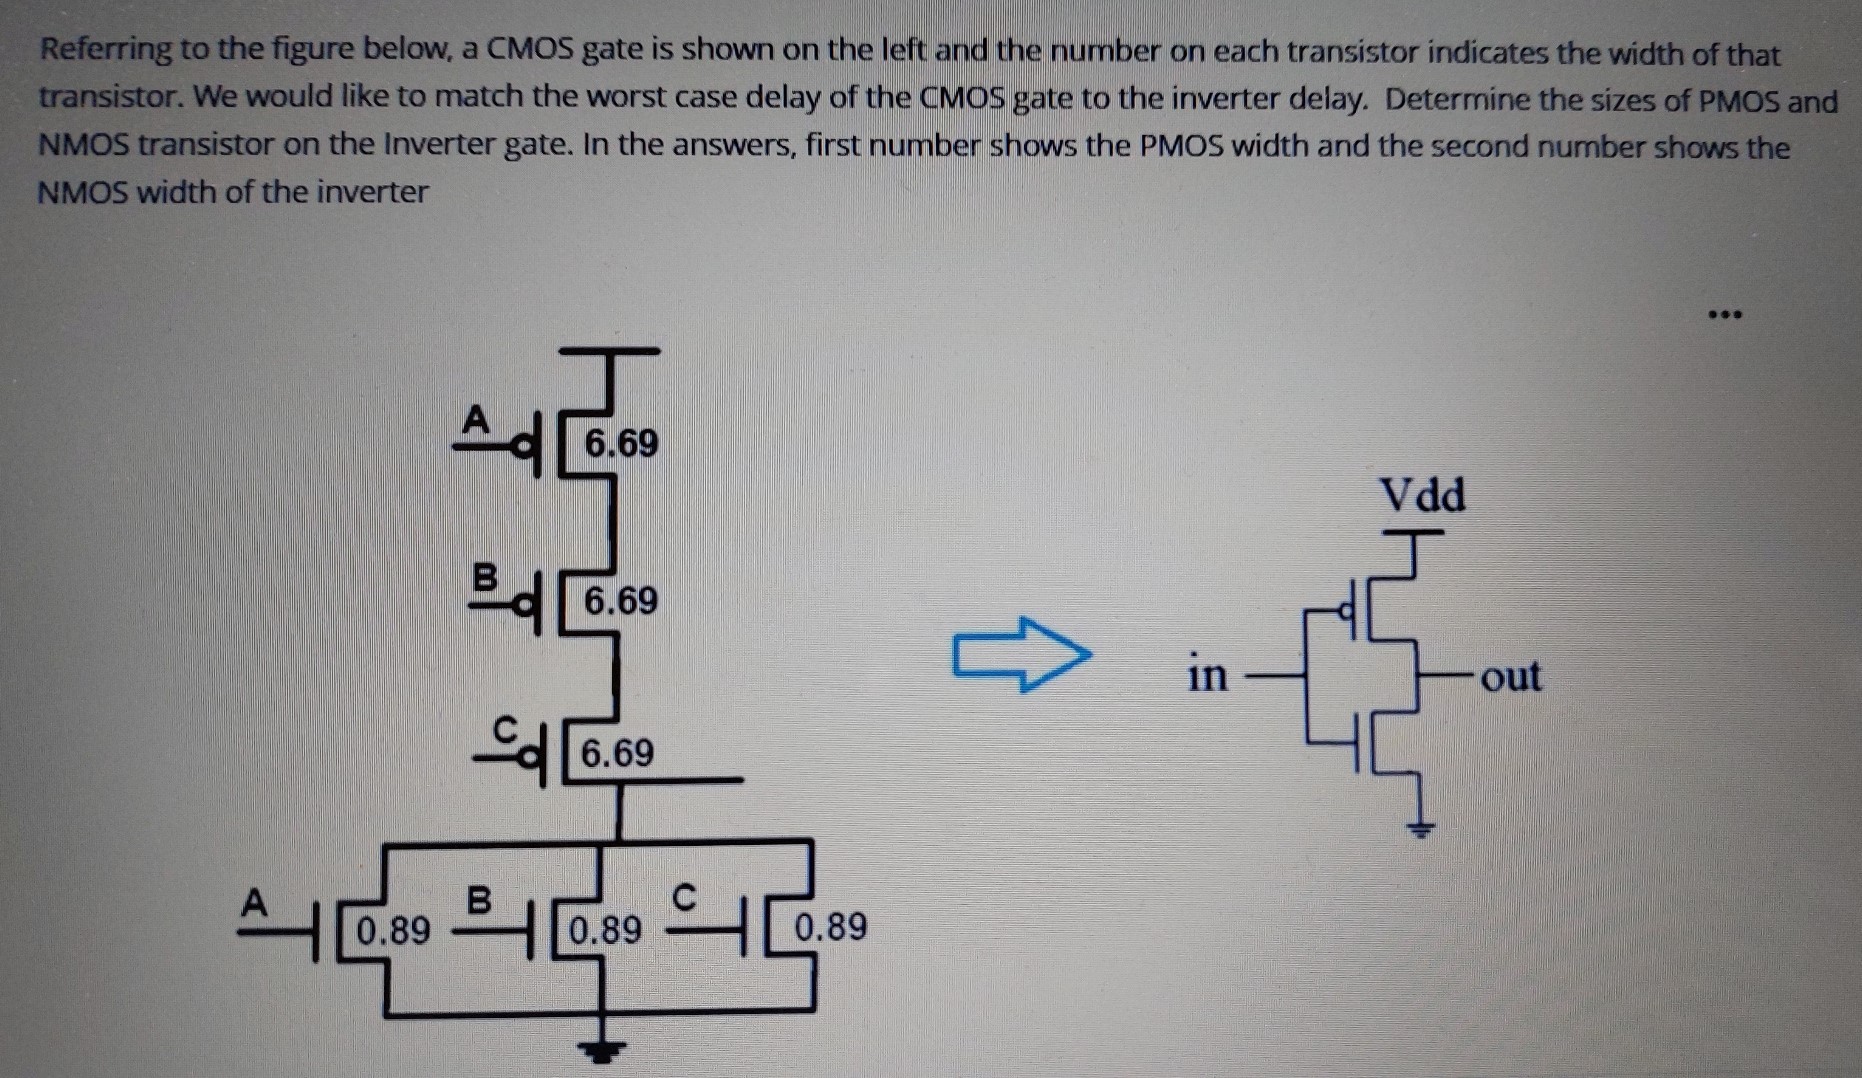 Referring to the figure below, a CMOS gate is shown on the left and the number on each transistor indicates the width of that transistor. We would like to match the worst case delay of the CMOS gate to the inverter delay. Determine the sizes of PMOS and NMOS transistor on the Inverter gate. In the answers, first number shows the PMOS width and the second number shows the NMOS width of the inverter 